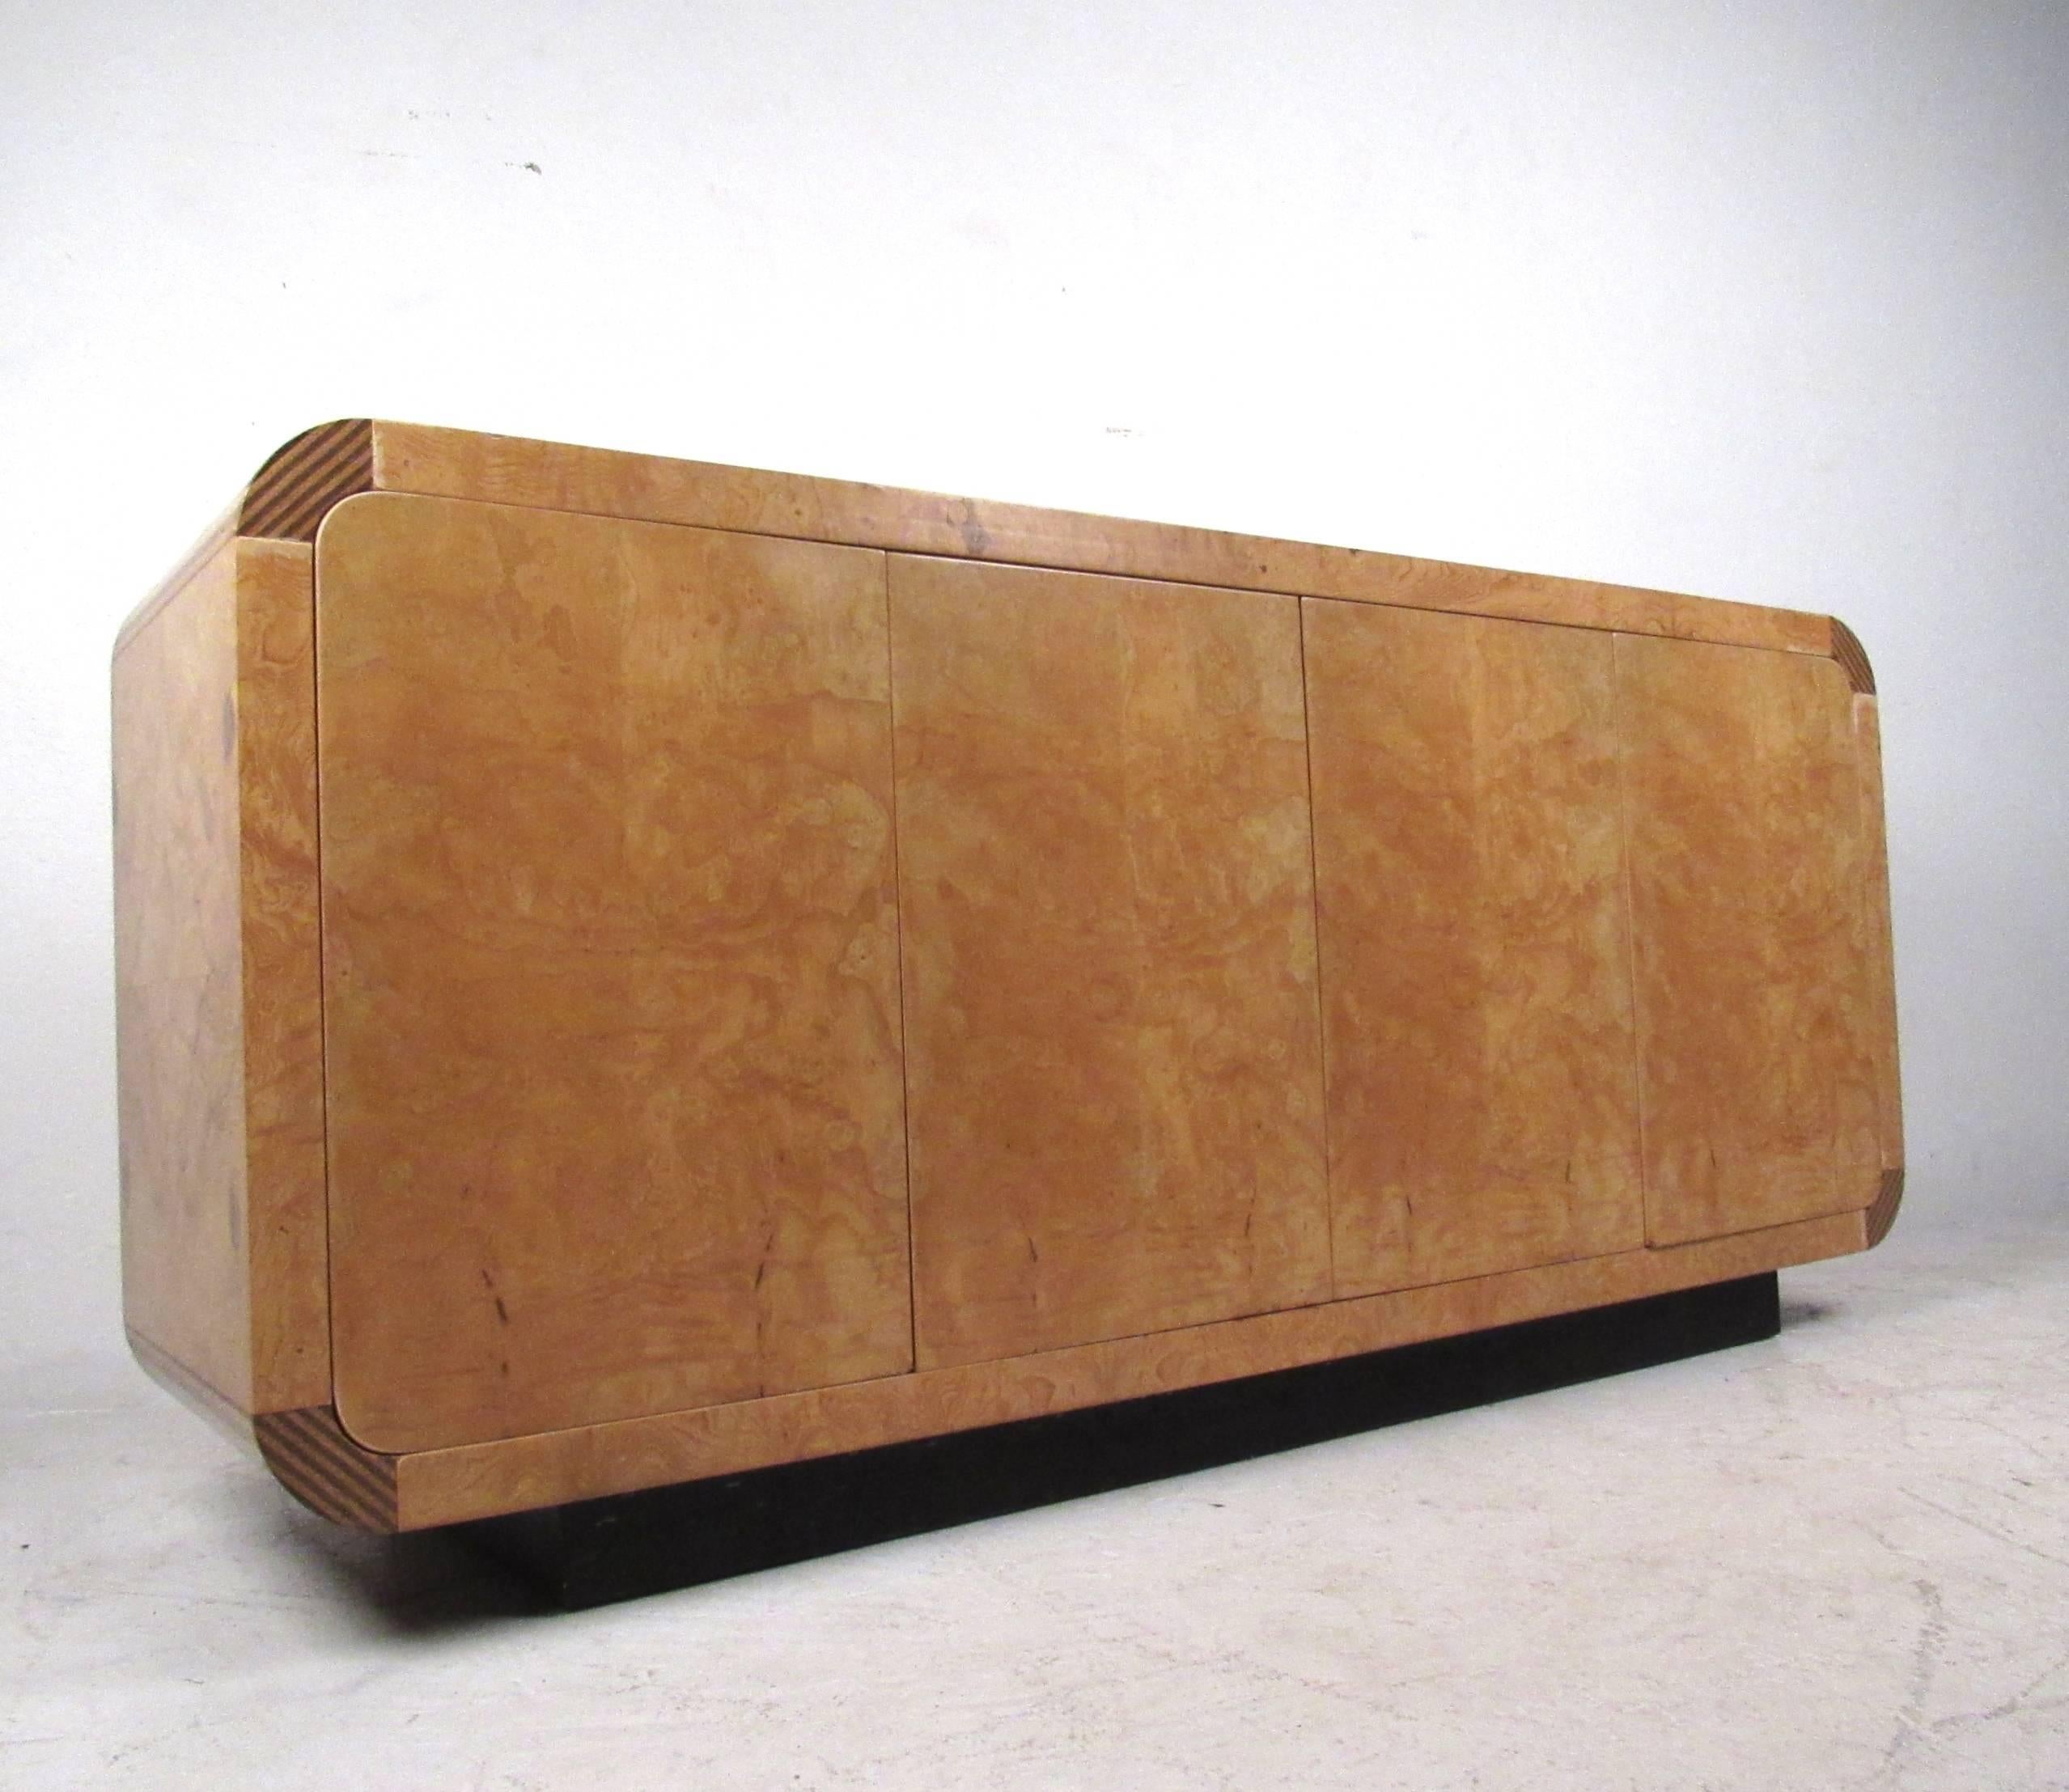 This vintage burl wood credenza by Henredon makes a stylish storage piece for any room. Quality construction, decorative corner inlays, and adjustable shelves round out some of the features of this uniquely sized credenza. Please confirm item